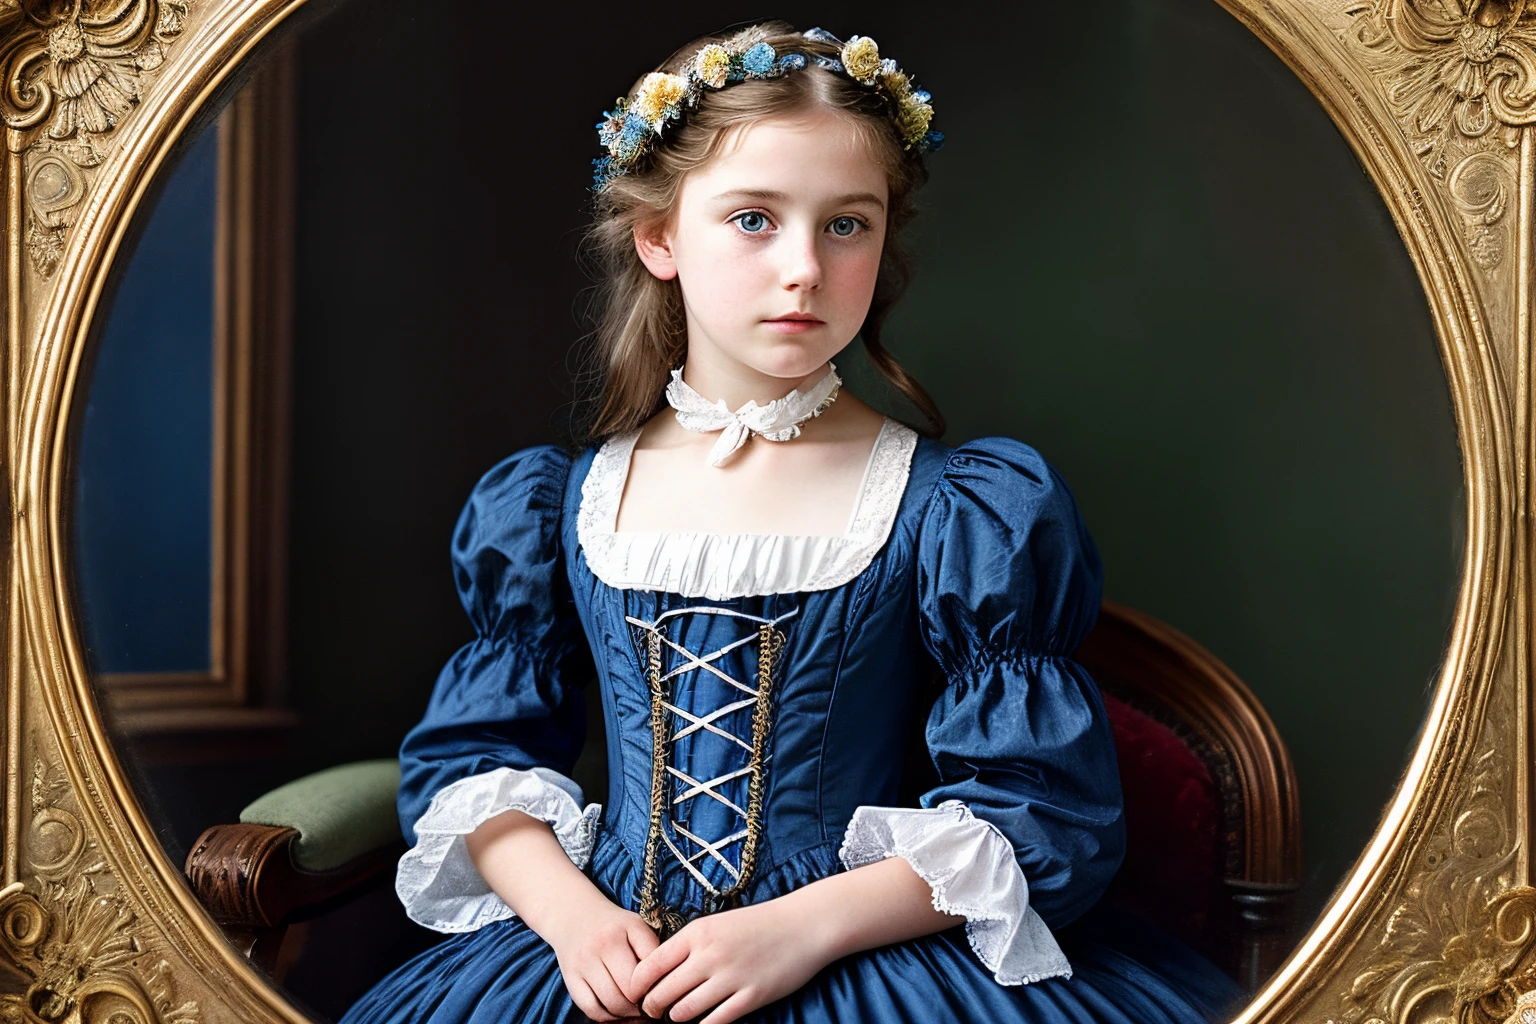 there is a young girl in a dress and a flower in her hair, victorian style costume, victorian blue dress, inspired by Alice Prin, lovely languid princess, portrait of princess, princess portrait, portrait of a princess, inspired by Sophie Gengembre Anderson, young victorian sad fancy lady, victorian dress, young girl in steampunk clothes, gothic princess portrait